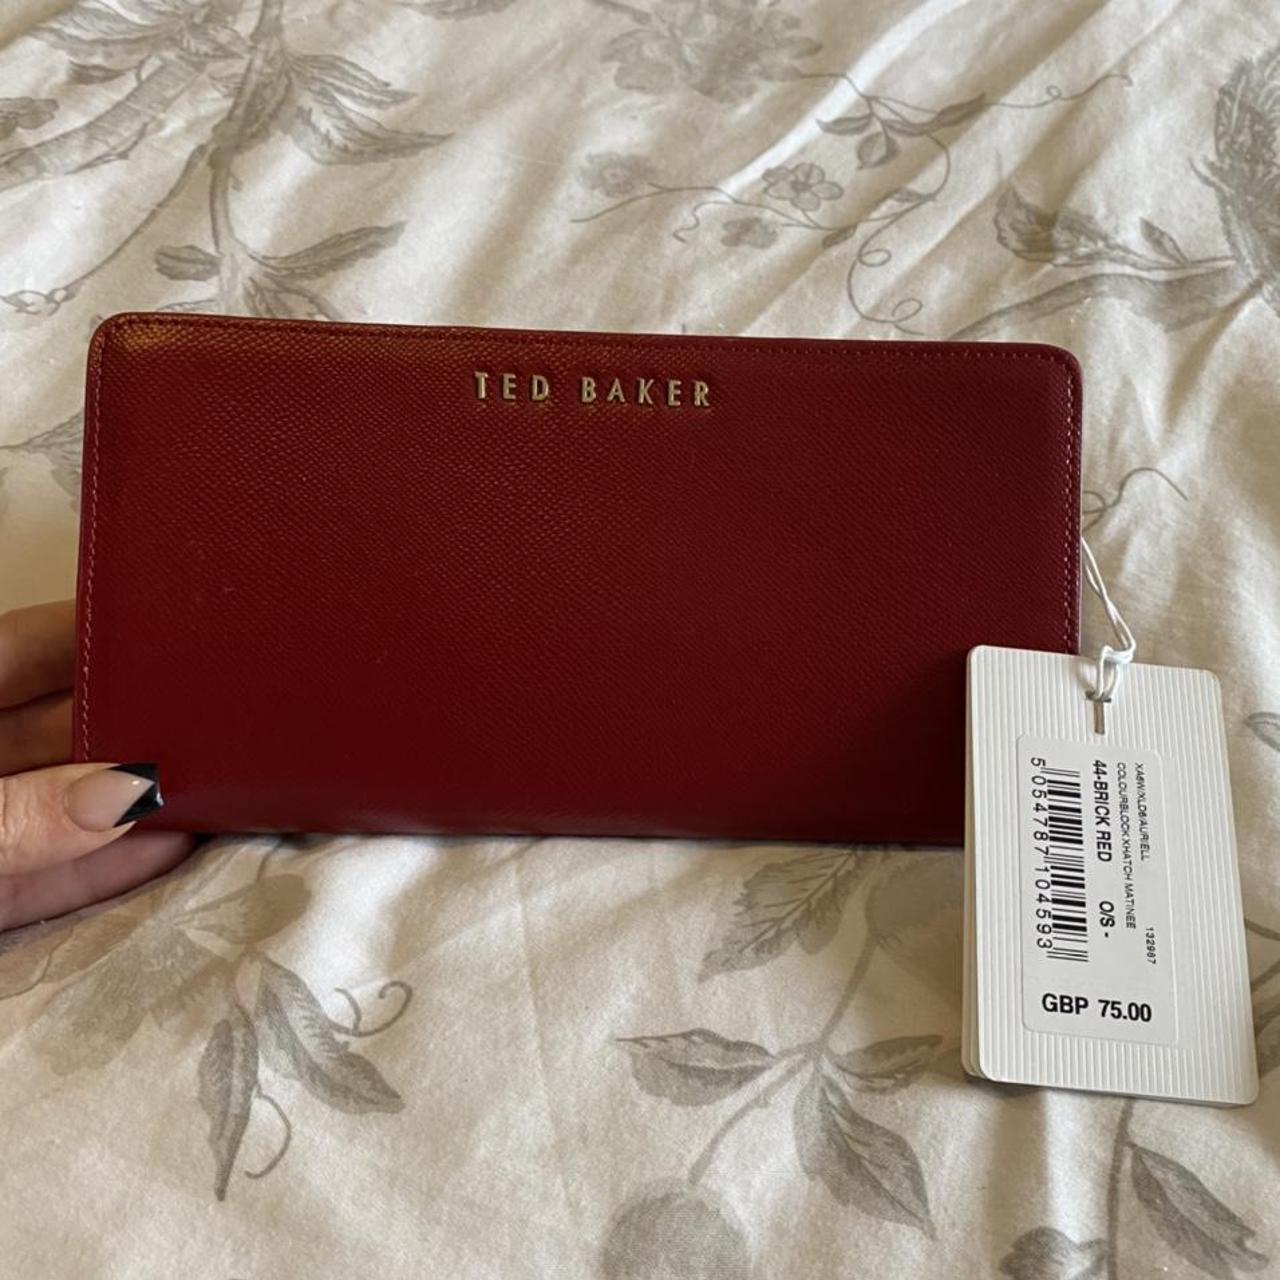 Ted Baker purse with Box | eBay